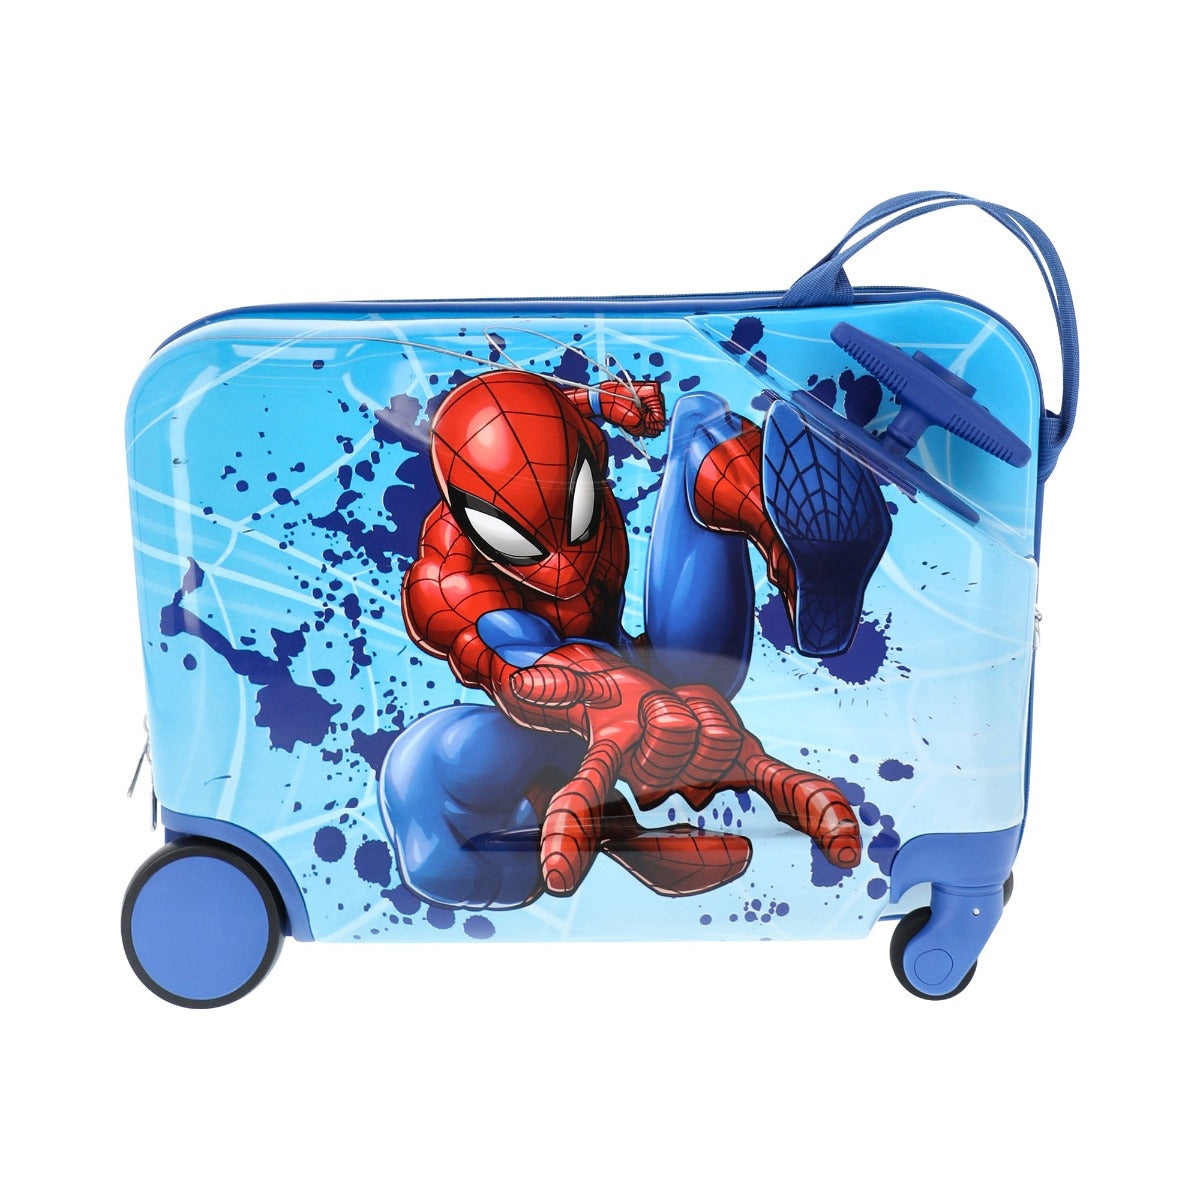 Ful Marvel Spiderman 14.5" carry-on rolling luggage for kids travel